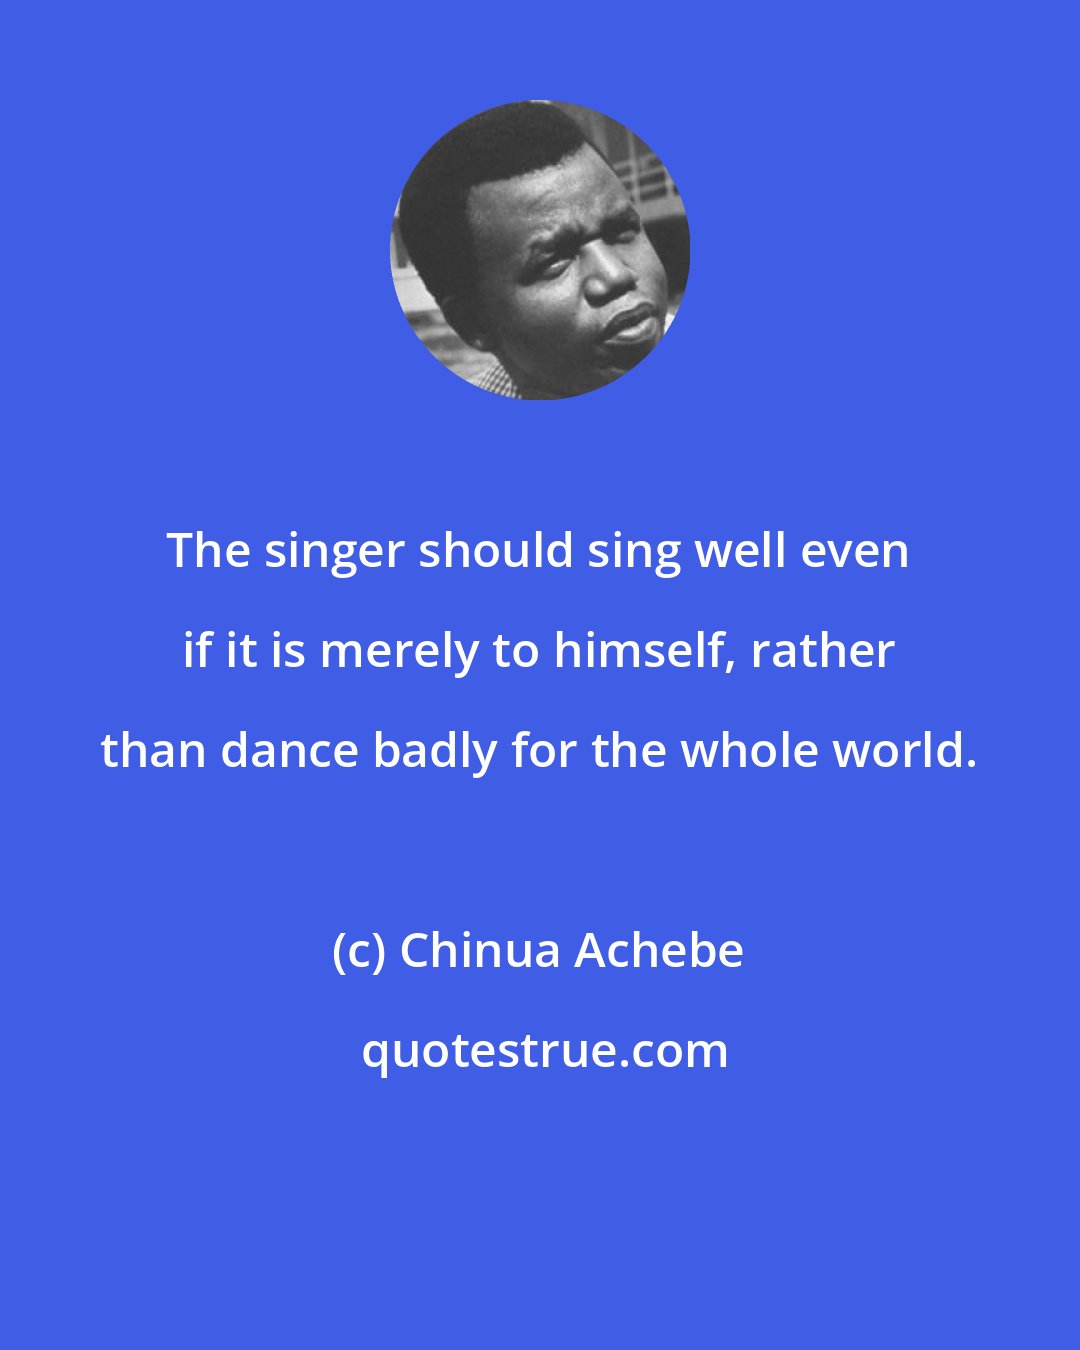 Chinua Achebe: The singer should sing well even if it is merely to himself, rather than dance badly for the whole world.